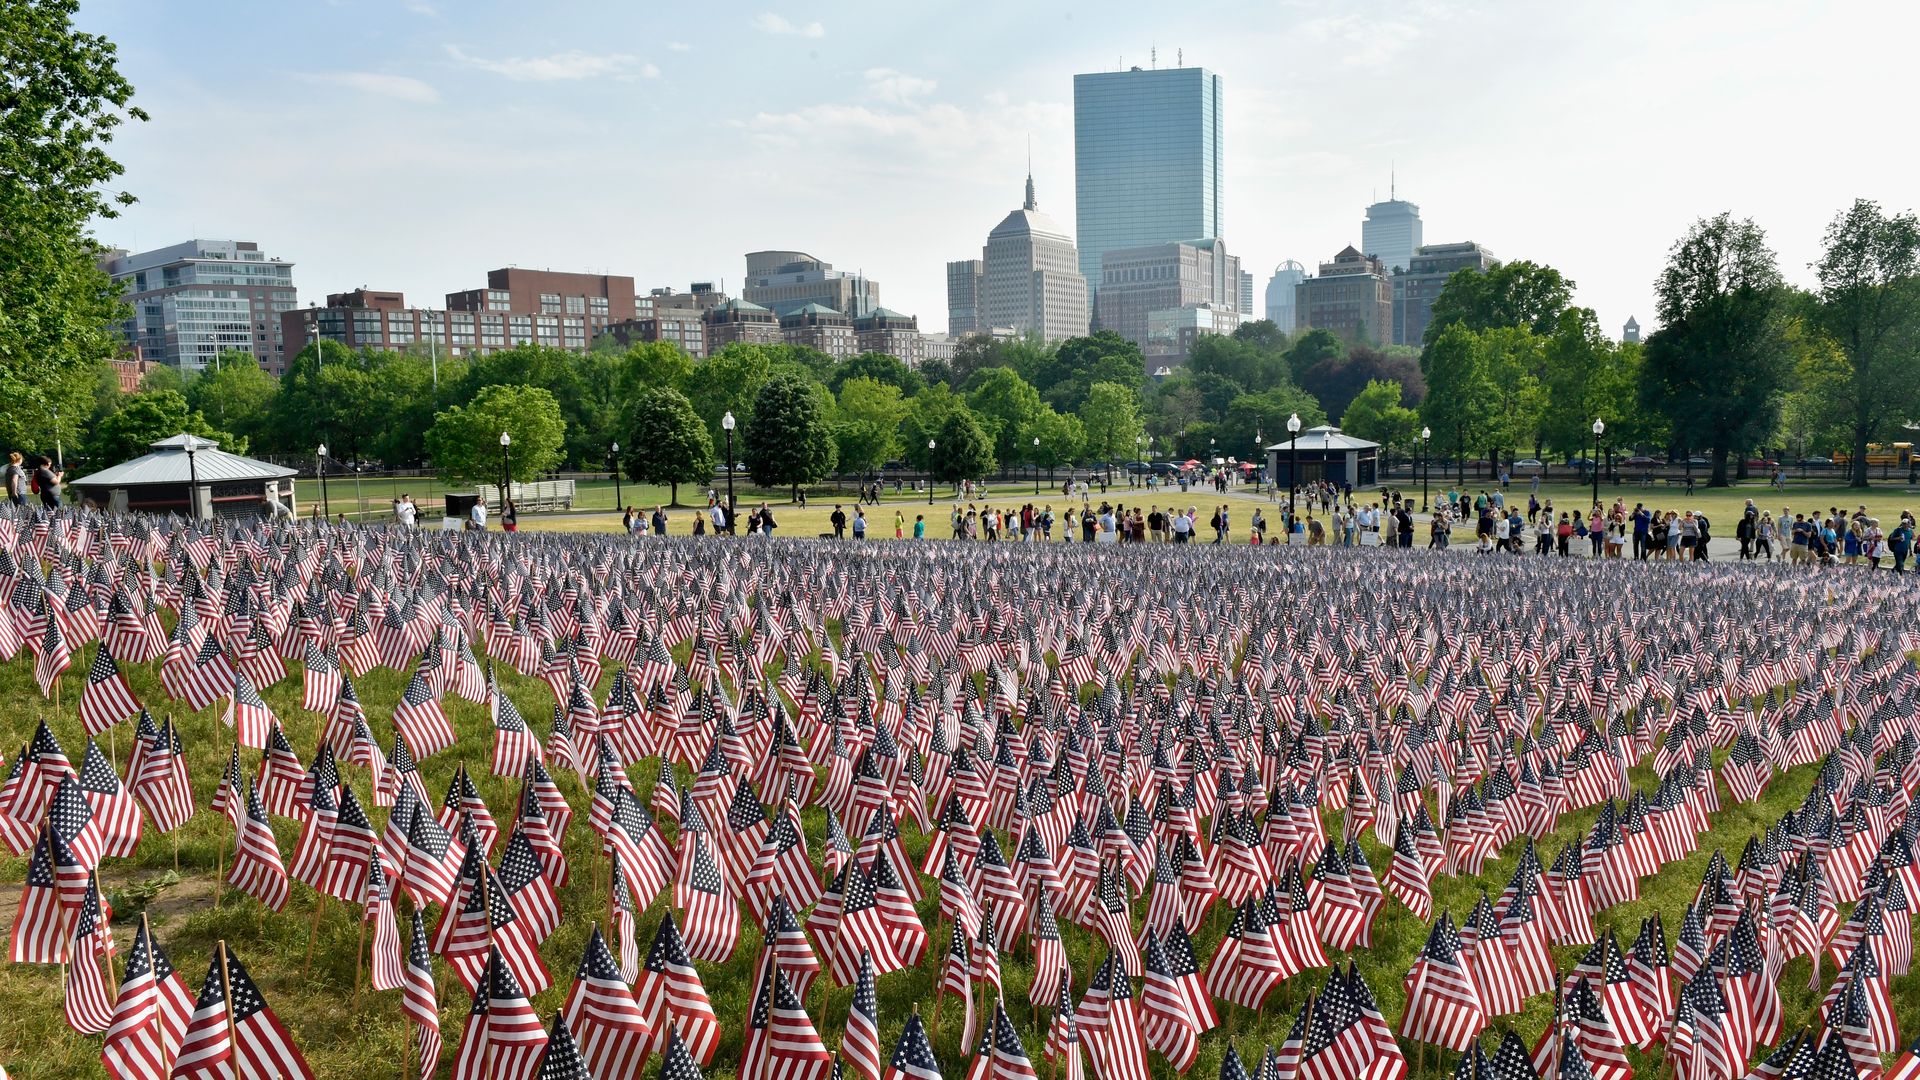 A view of the garden of 37,000 American flags planted on the Boston Common in 2021